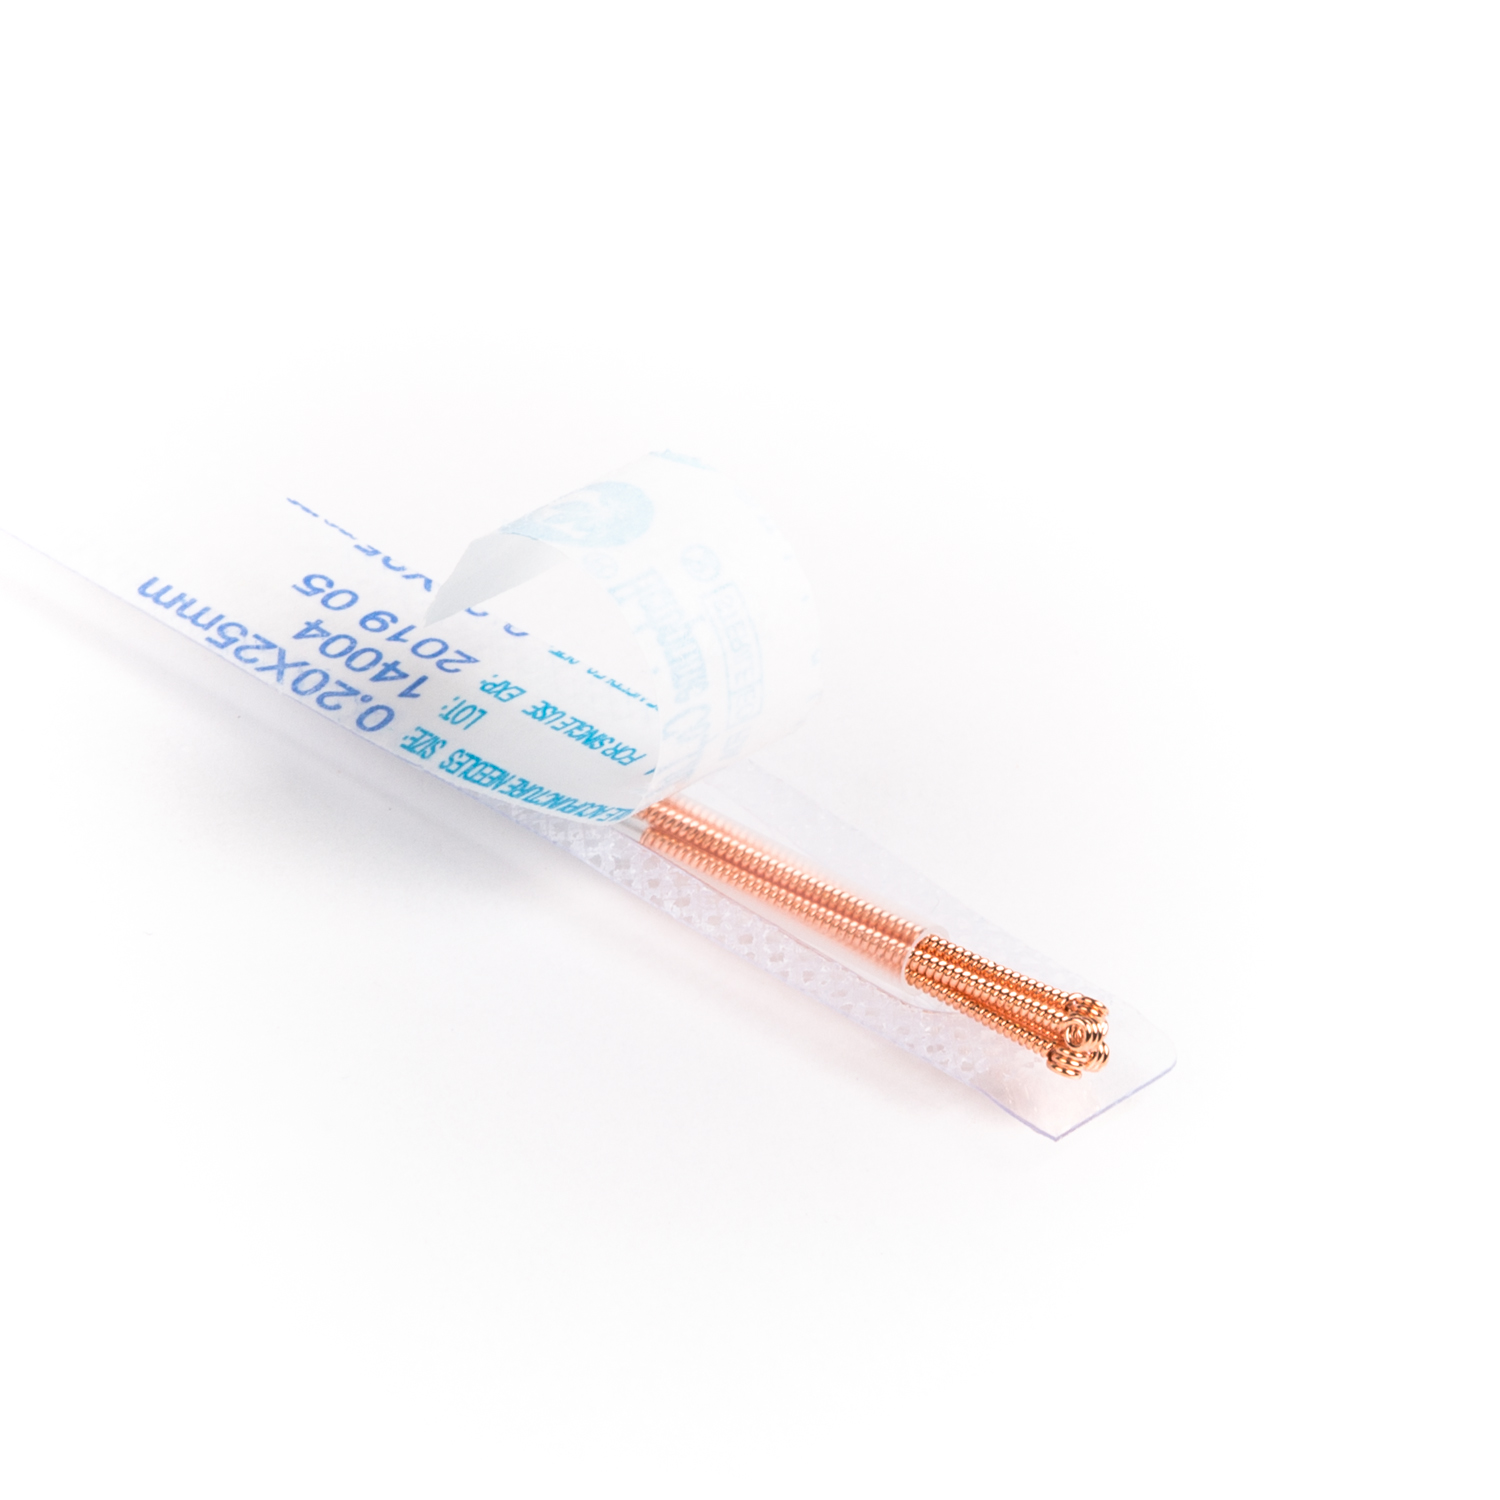 Altra Copper Handle Acupuncture Needle 5-in-1 Cluster Pack (L-Type) 500 Needles